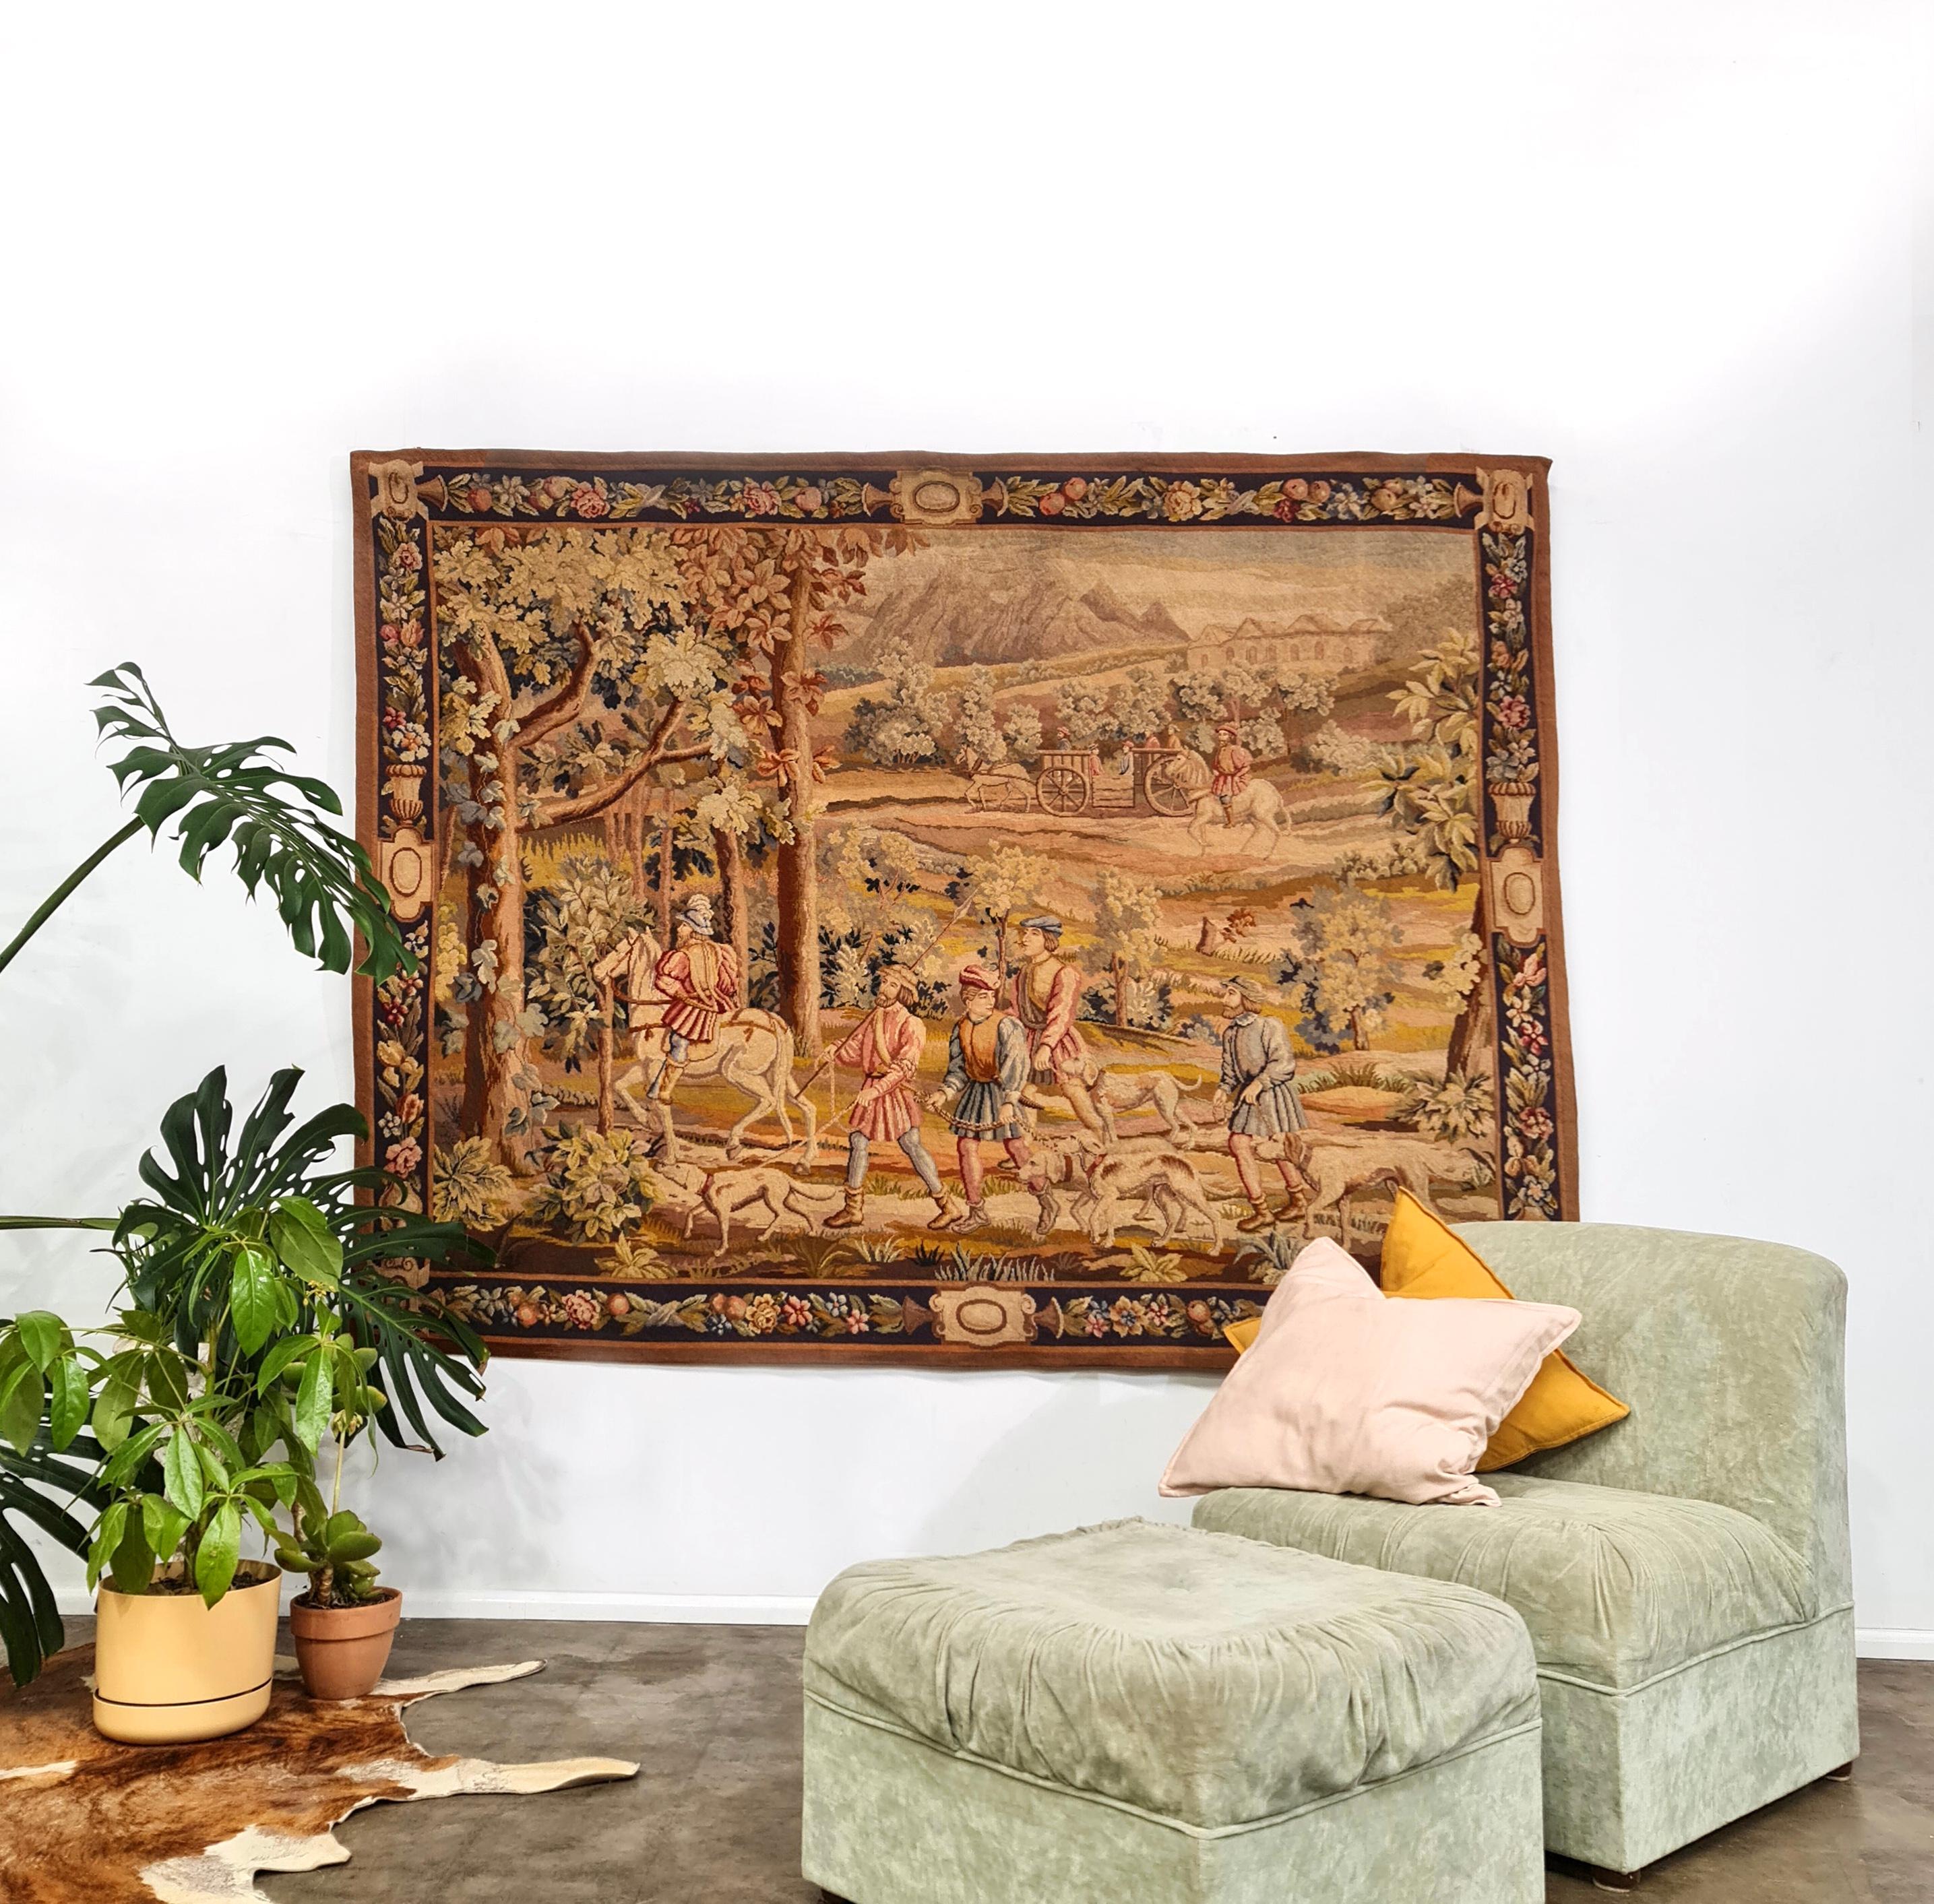 Beautifully vivid, 1860-1870 Hand-woven Aubusson French Tapestry. Bought in St Ouen Paris.
Warm fresh earthy tones, with amazing detail all in excellent condition. 
This piece has had a linen backing previously applied and has a range of hanging